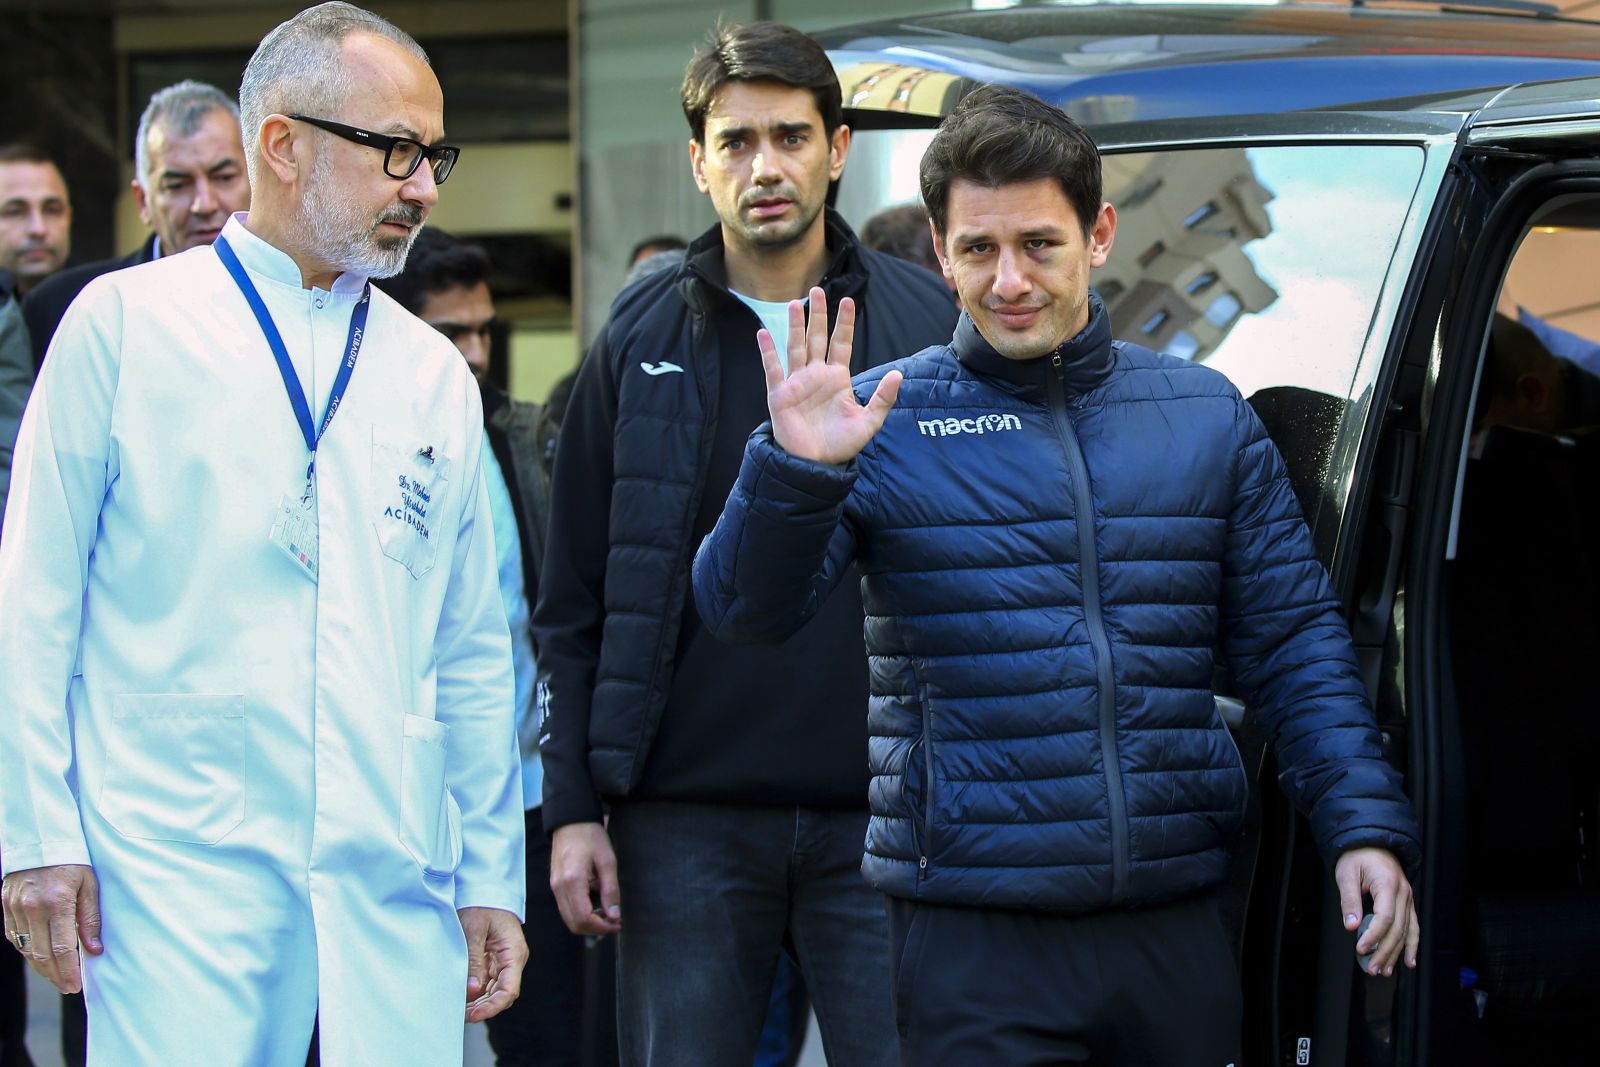 Turkish soccer referee Halil Umut Meler, right, gestures as he leaves Acibadem hospital in Ankara, Wednesday, Dec. 13, 2023. The Turkish Football Federation has suspended all league games after the president of a first-division soccer club punched a referee in the face at the end of a top-flight match. (AP Photo/Ali Unal)